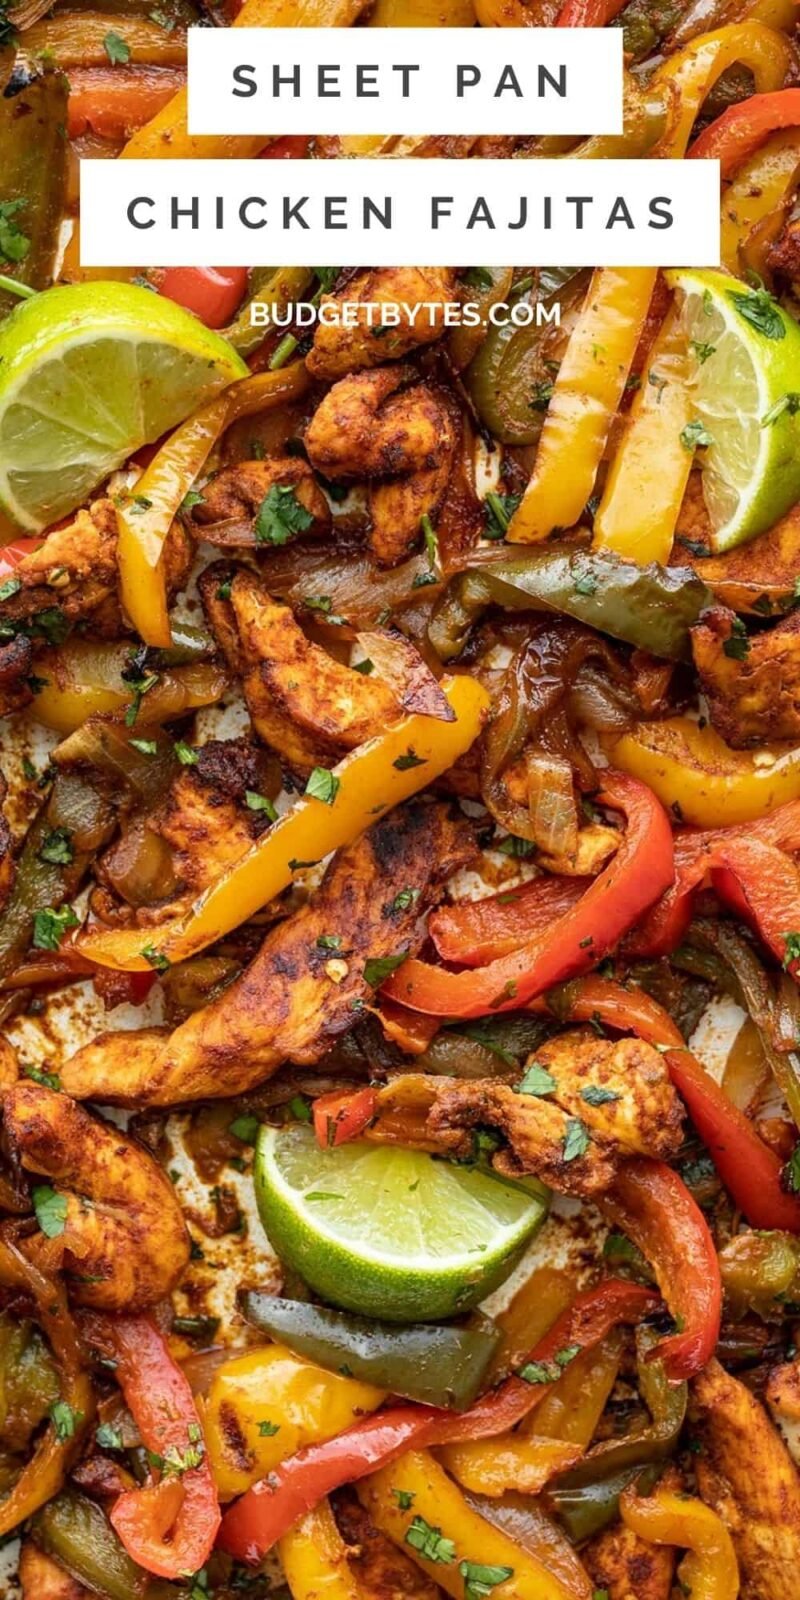 close up of fajita chicken and vegetables, title text at the top.